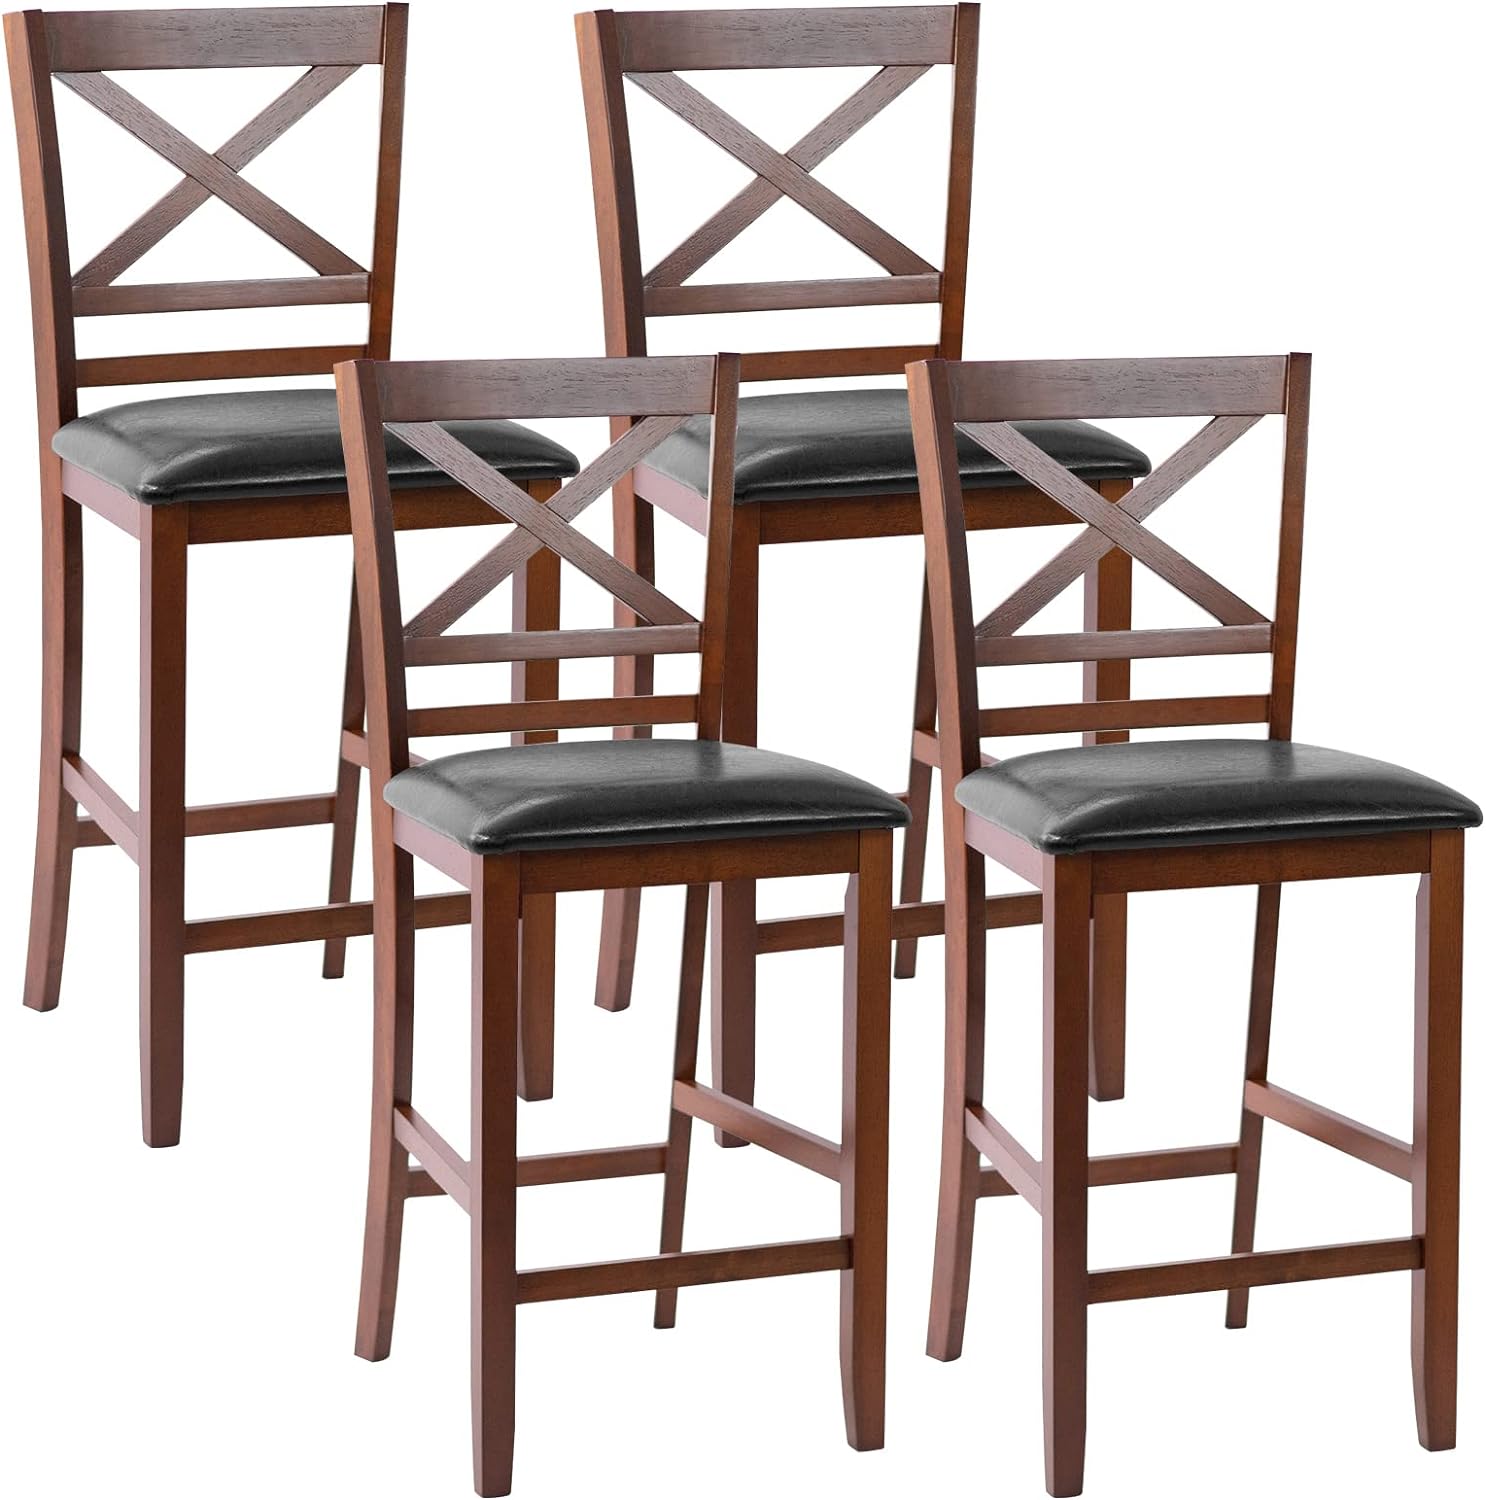 COSTWAY Bar stools Set of 4, Modern 25 Counter Height Dining Pub Stools with X-Shaped Backrest, Soft Cushion & Durable PU Seat, Simplistic Armless Kitchen Chairs for Home, Cafe Store, Restaurant (4)